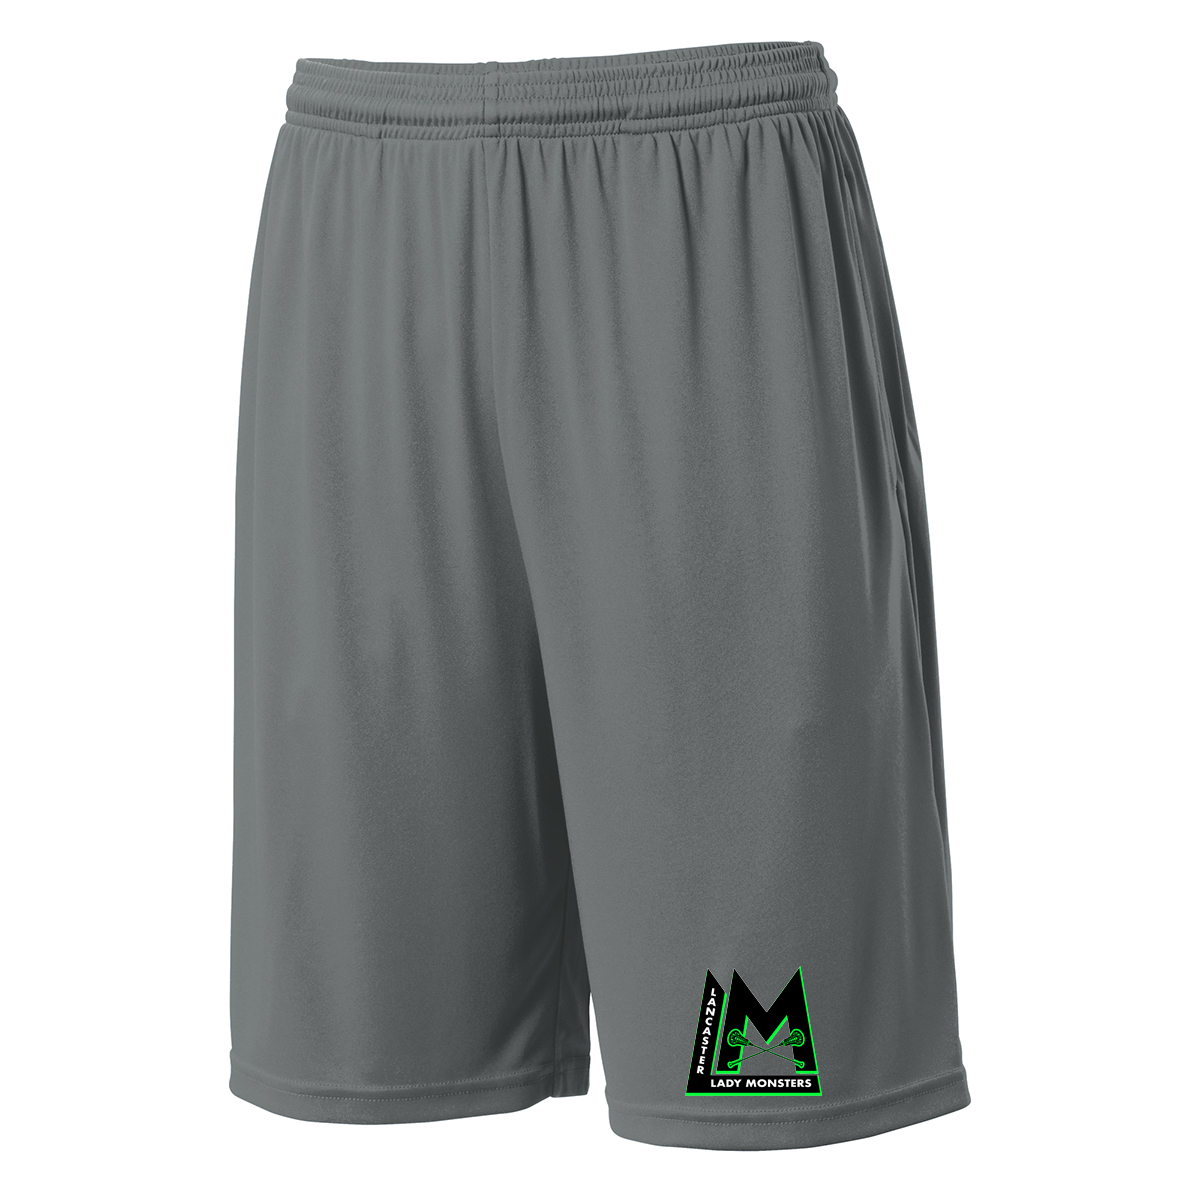 Lady Monsters Lacrosse Grey Shorts